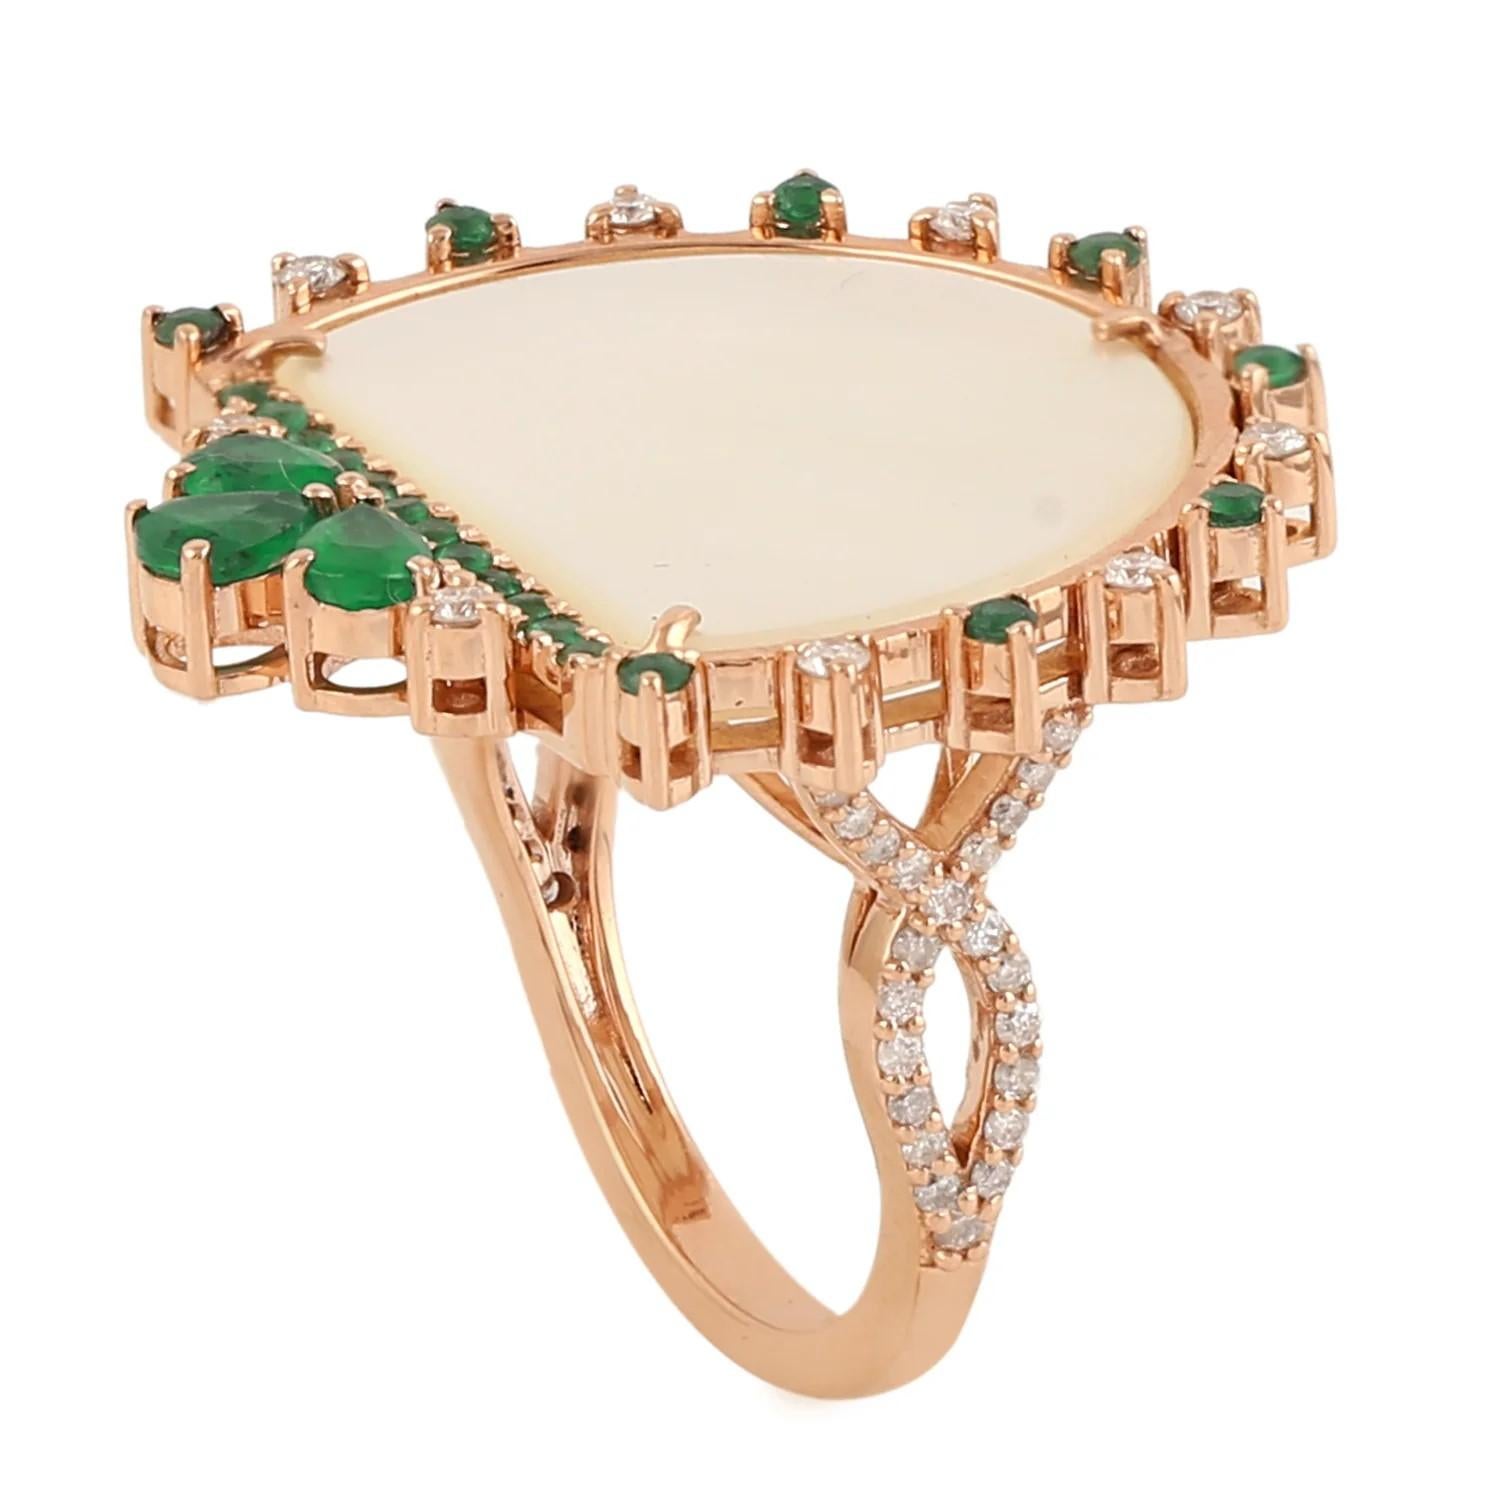 This ring has been meticulously crafted from 14-karat gold.  It is hand set with 7.93 carats mother of pearl, .80 carats emerald & .38 carats of sparkling diamonds. Also available matching earrings.

FOLLOW MEGHNA JEWELS storefront to view the